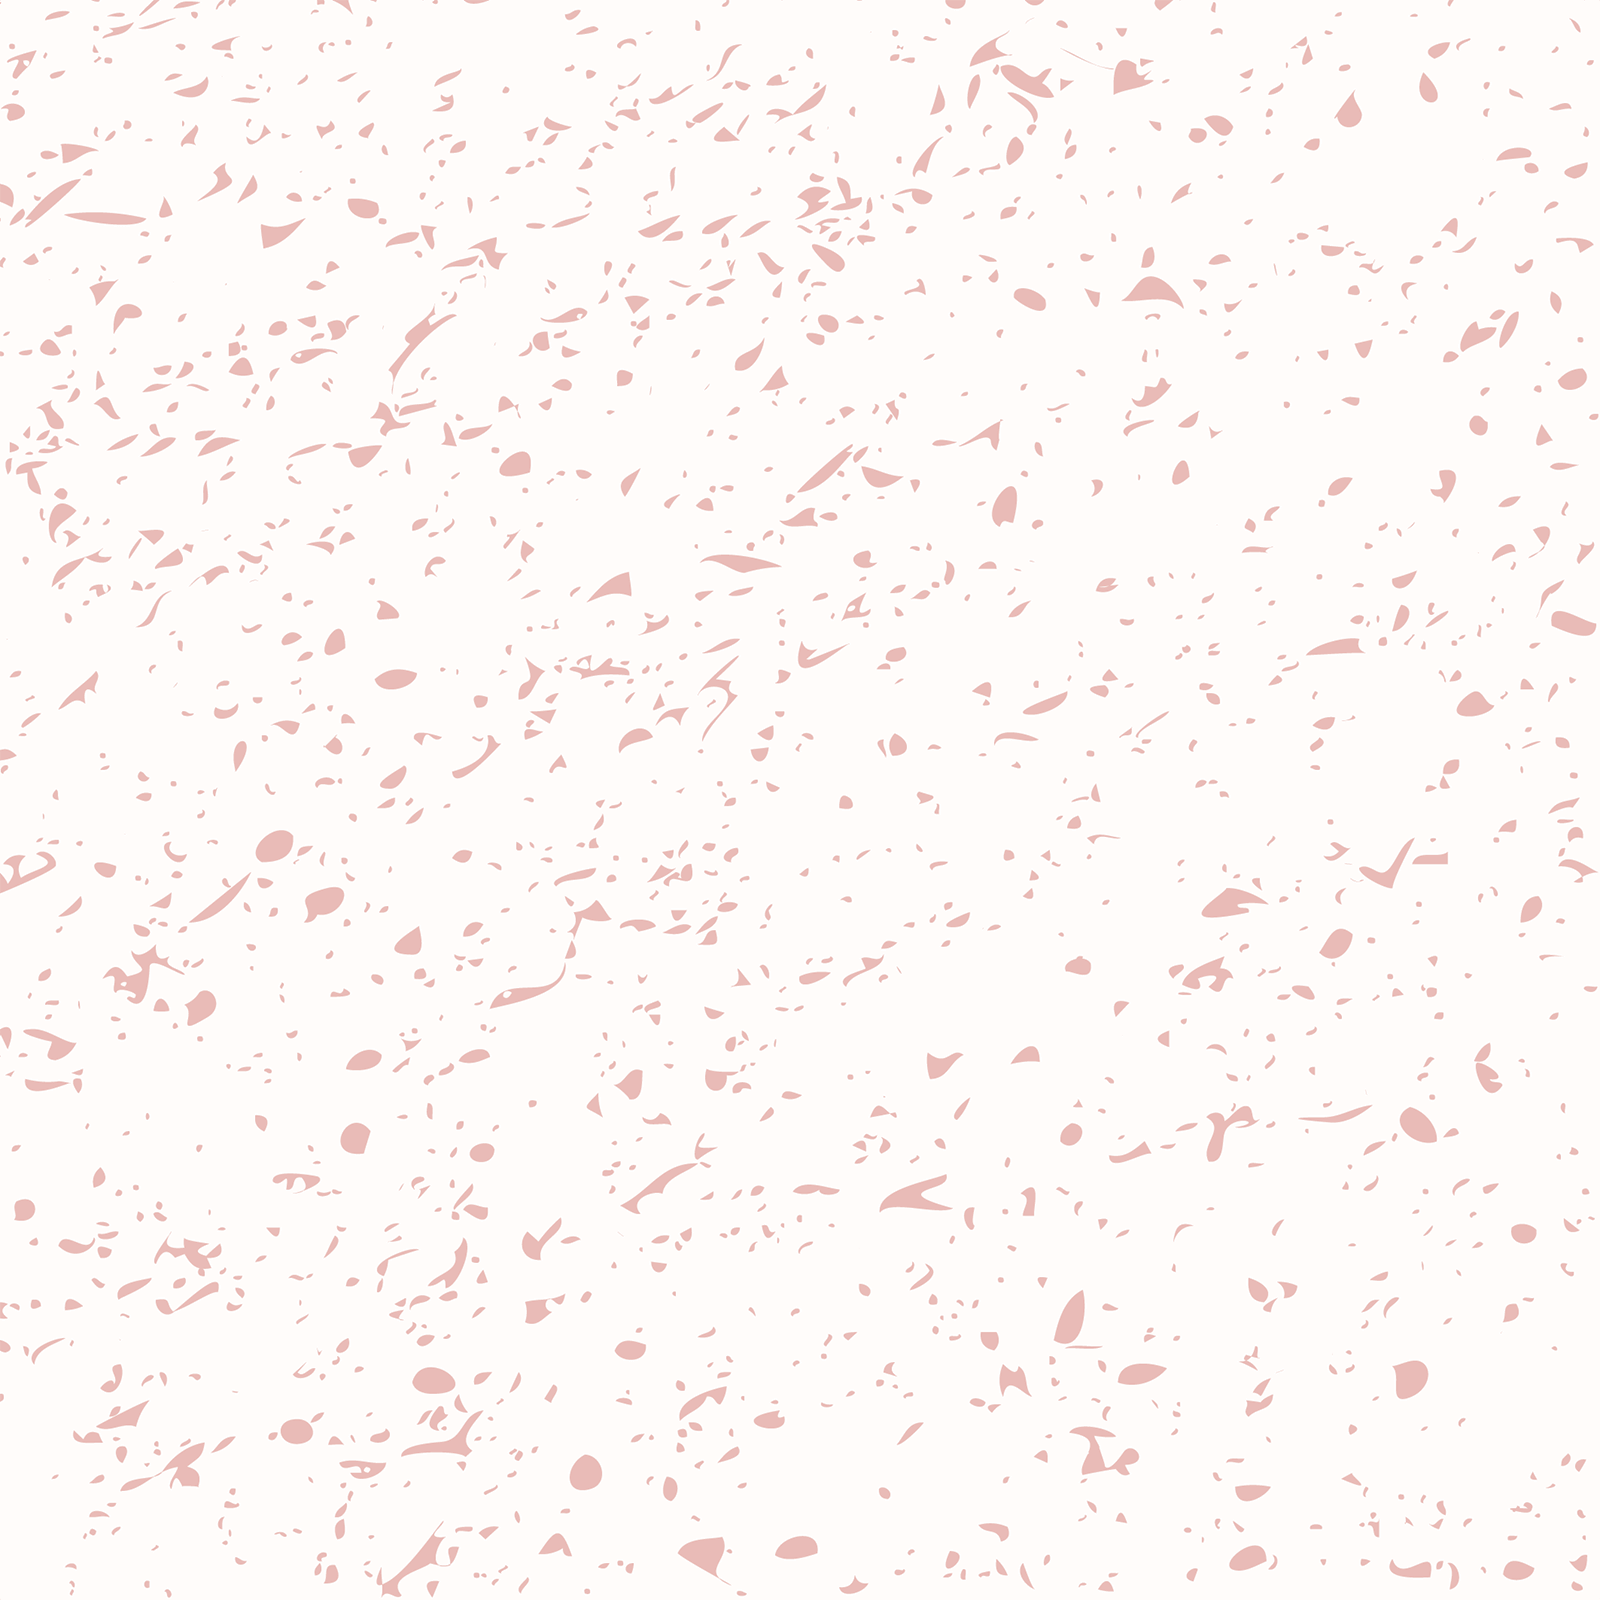 Speckle Pink